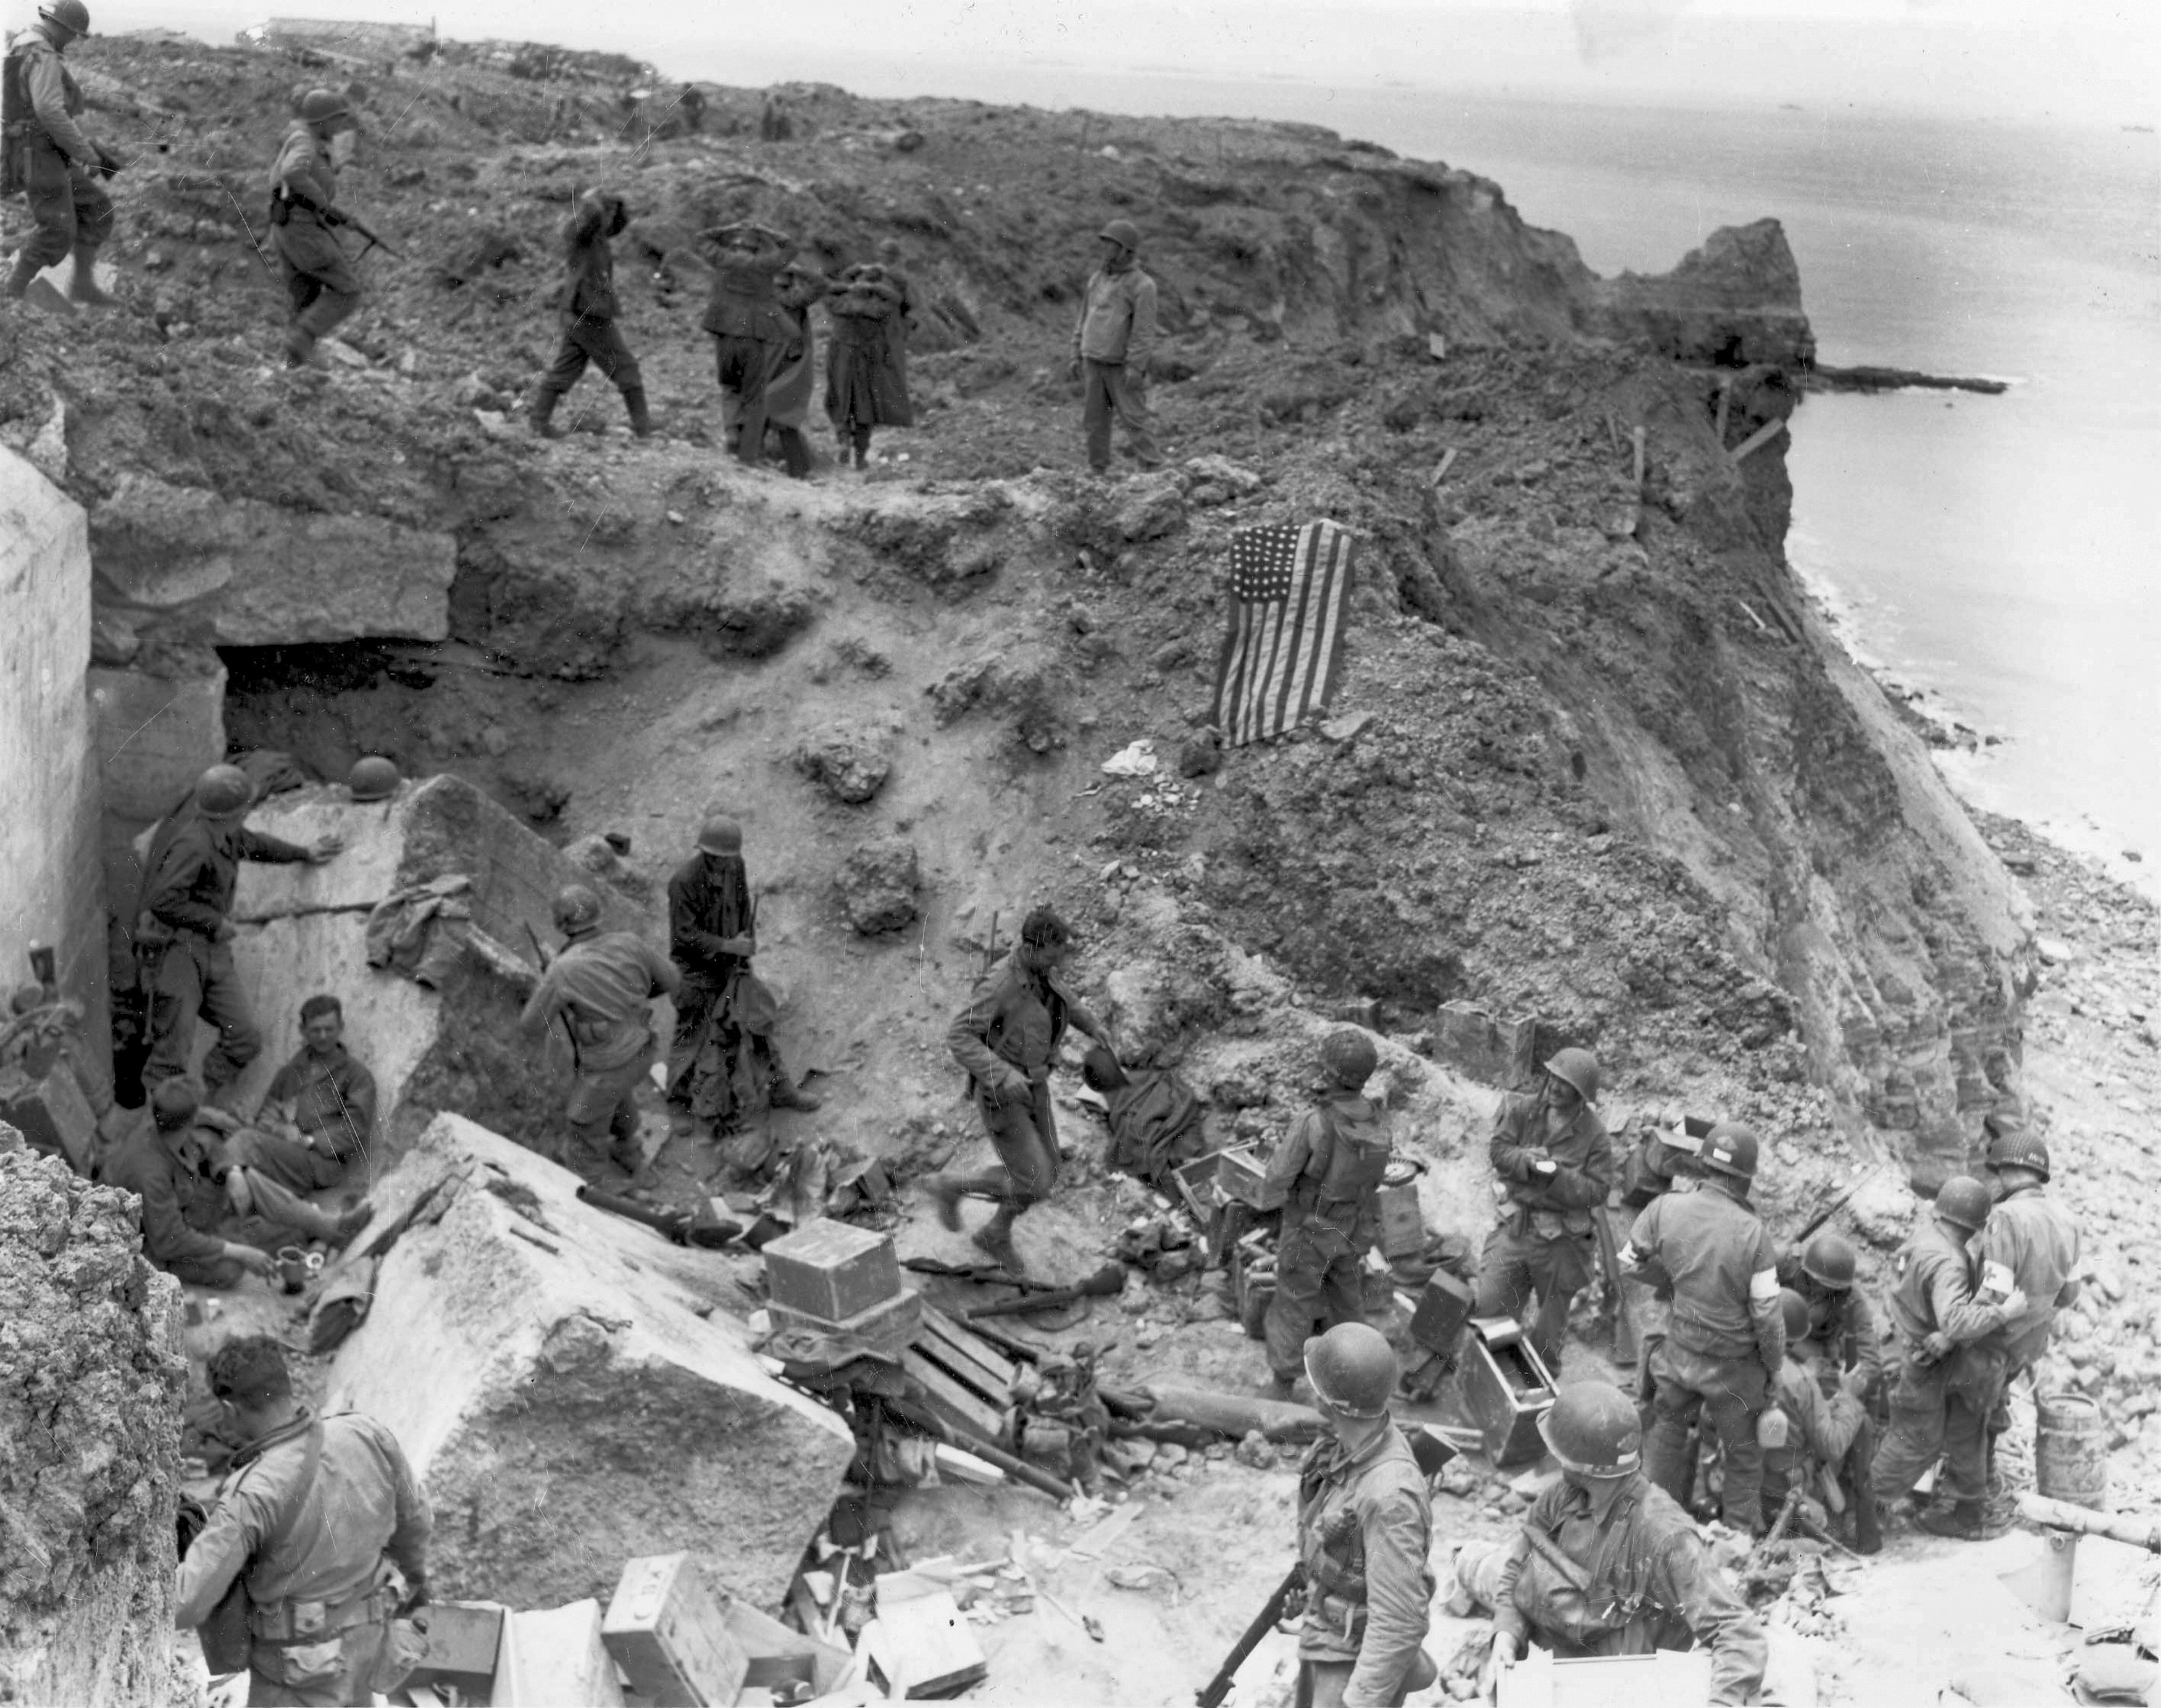 Handout photo of a U.S. flag used as a marker on a destroyed bunker at Pointe du Hoc